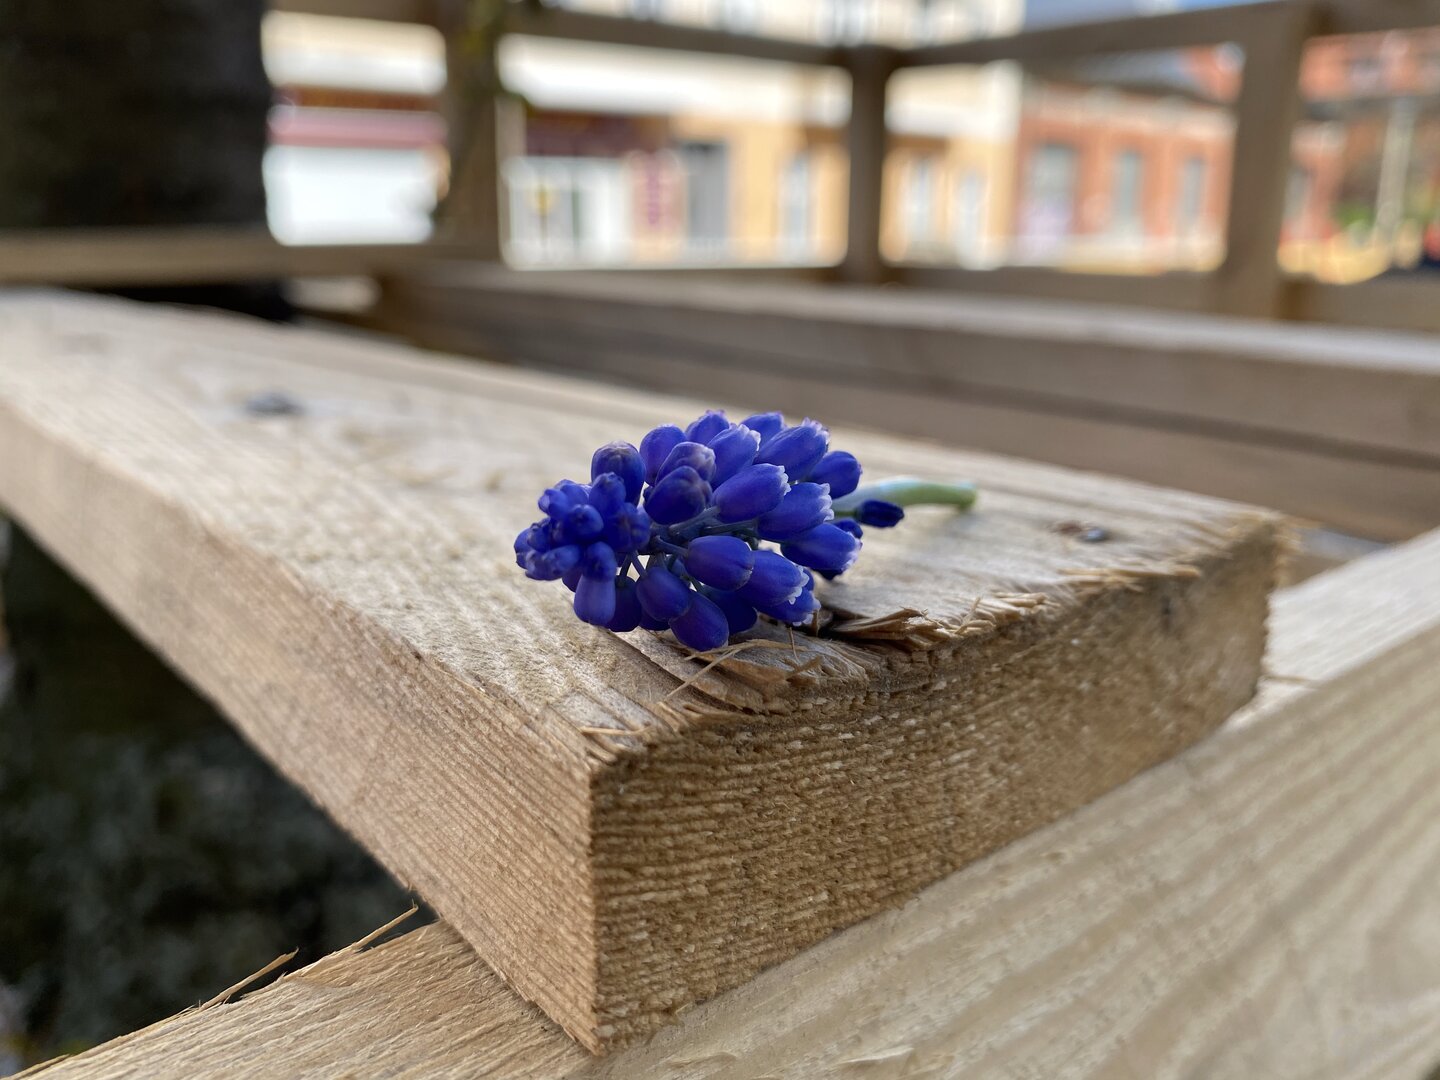 iPhone 11 Pro Max (f/1.8, ISO 32, 1/693 s)